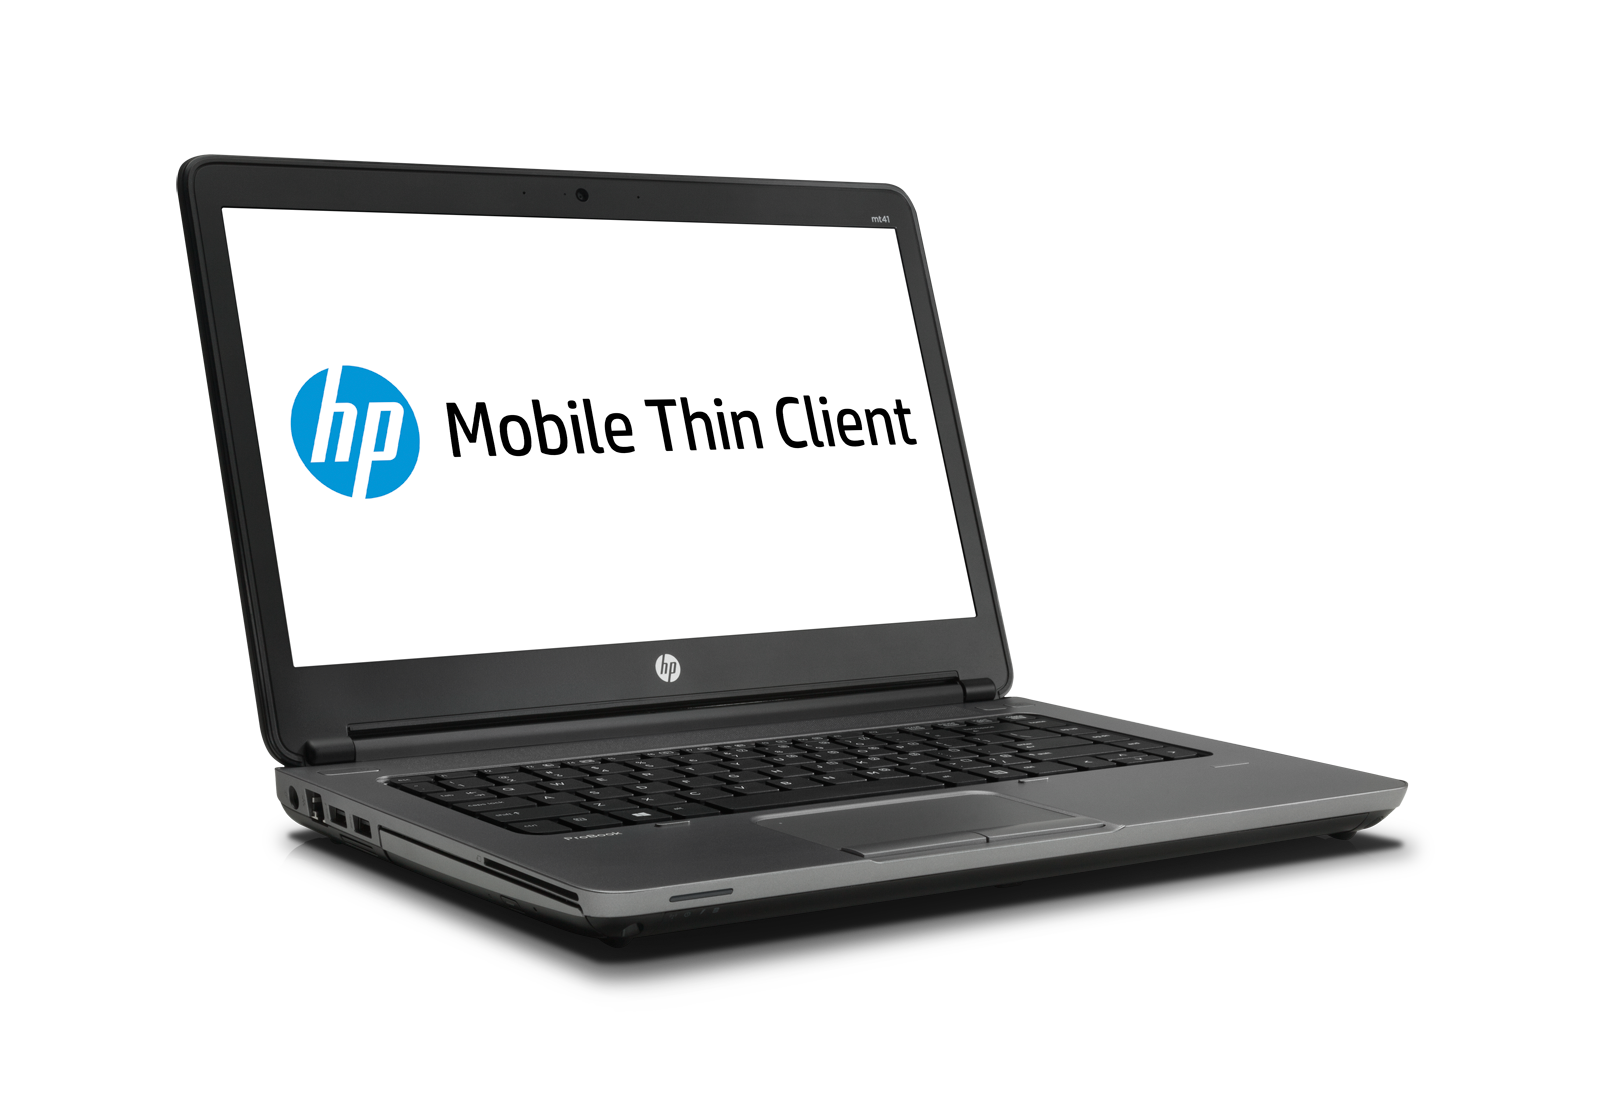 http://www.thinclient.org/thinclient-news/mt41%20%281%29.png